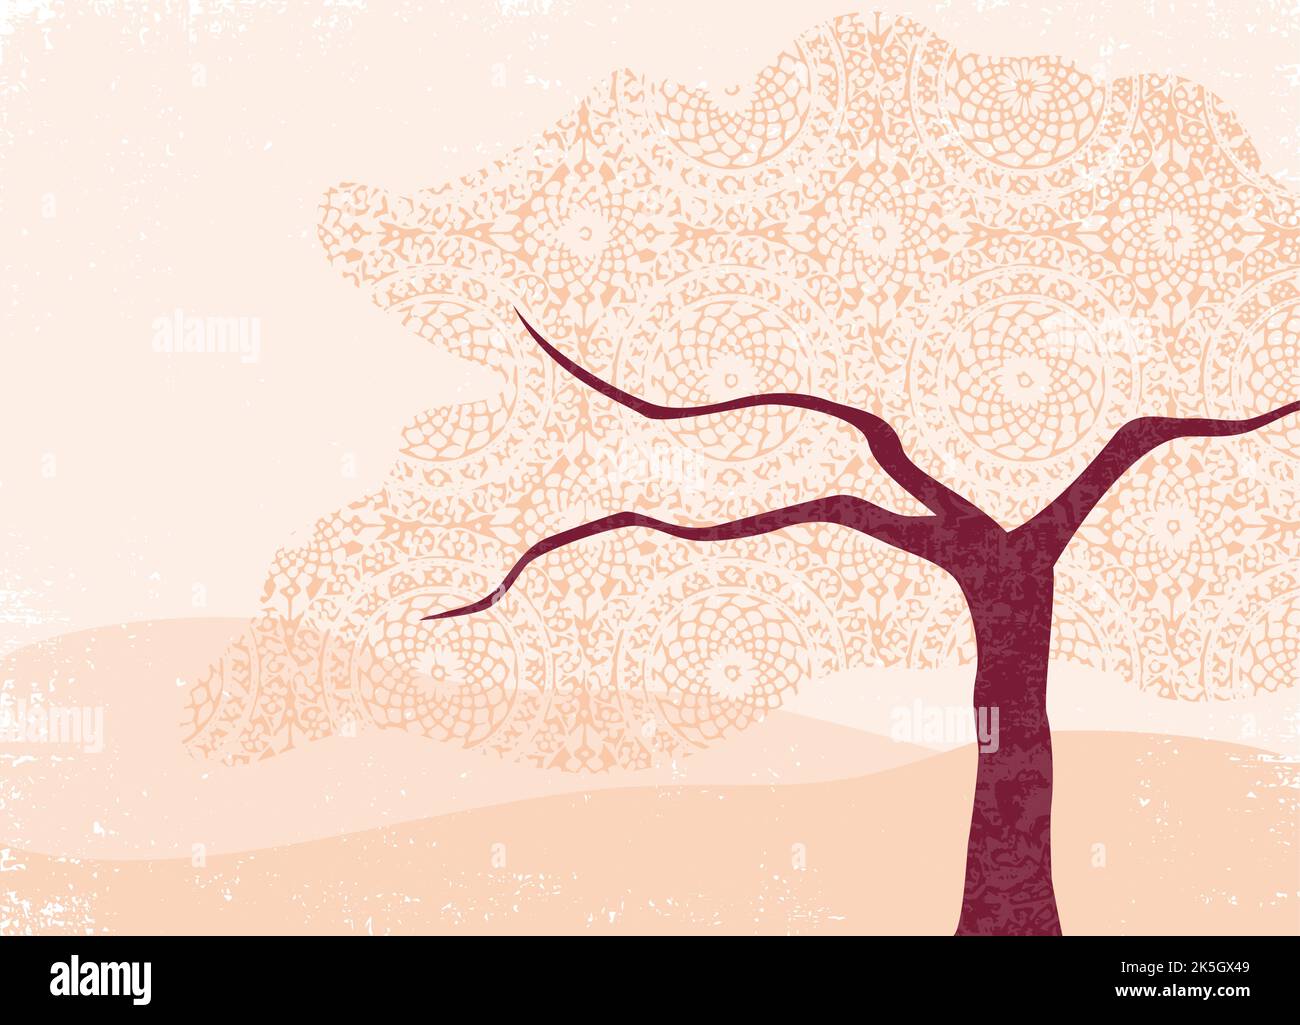 An abstract landscape with lacey canopy tree, in a cut paper style with textures Stock Vector